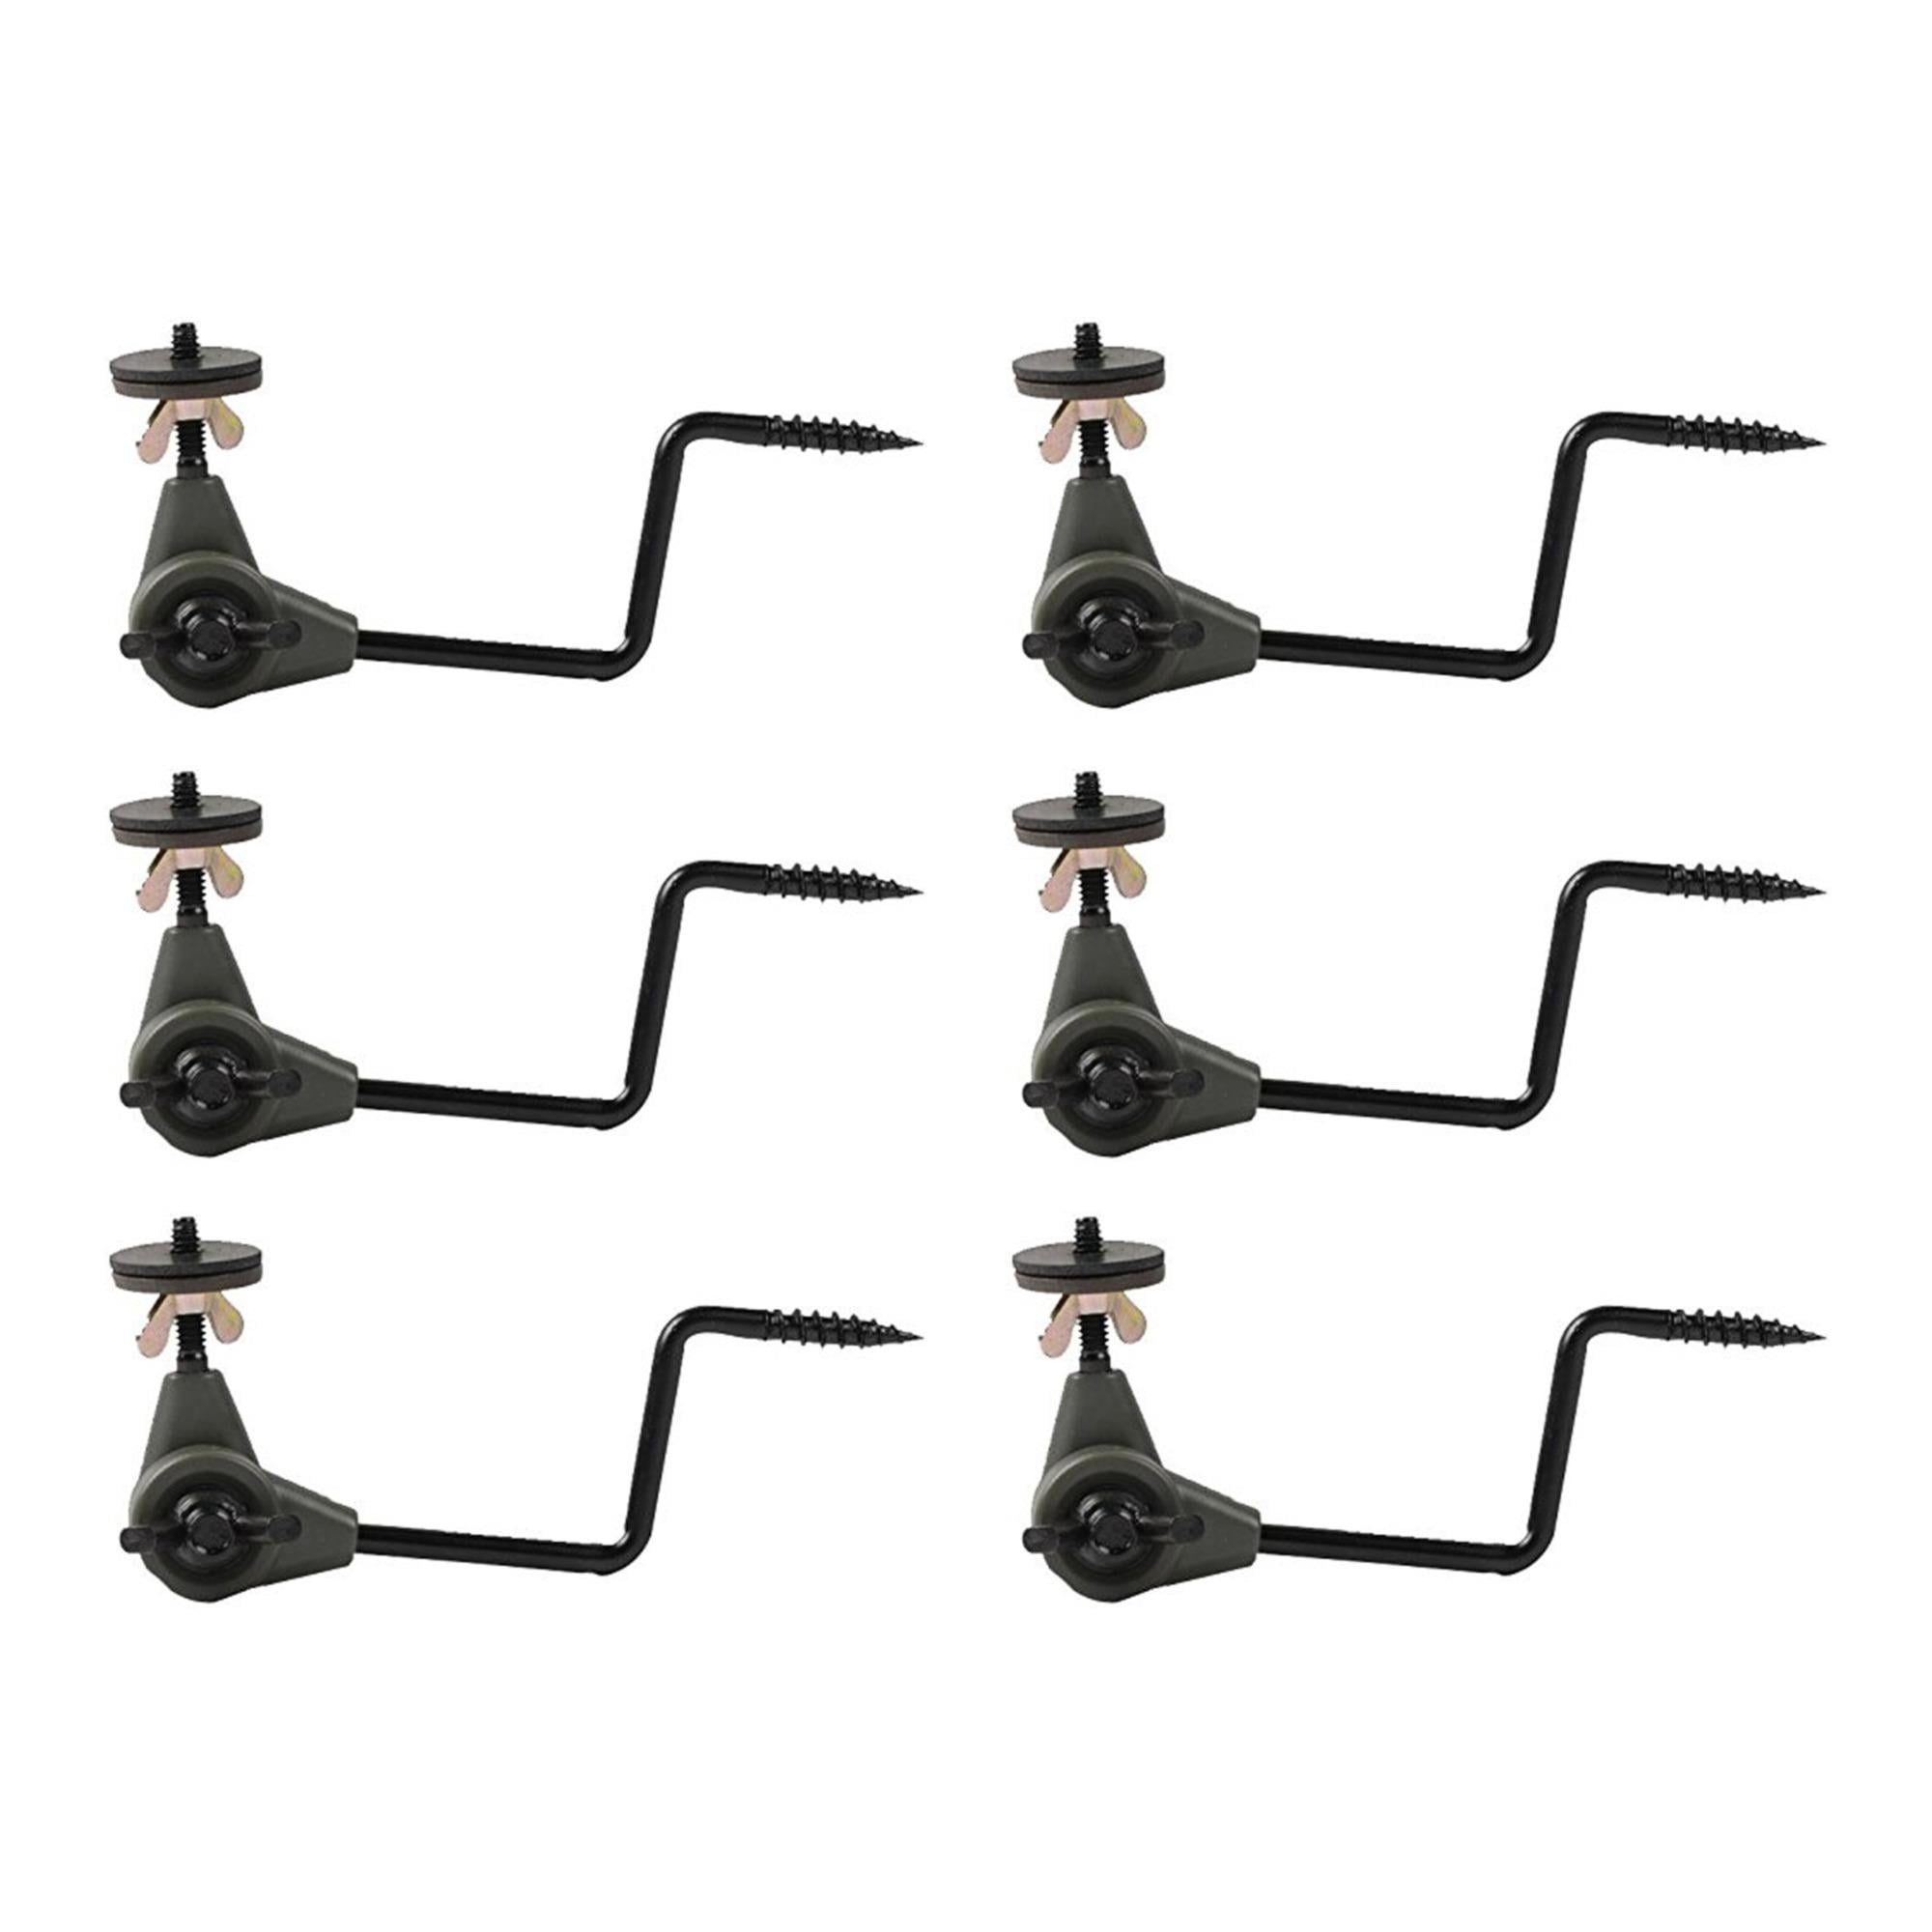 Details about   HME Products Trail Camera Holder Posts 10 Pack Bundle Universal Mounts 